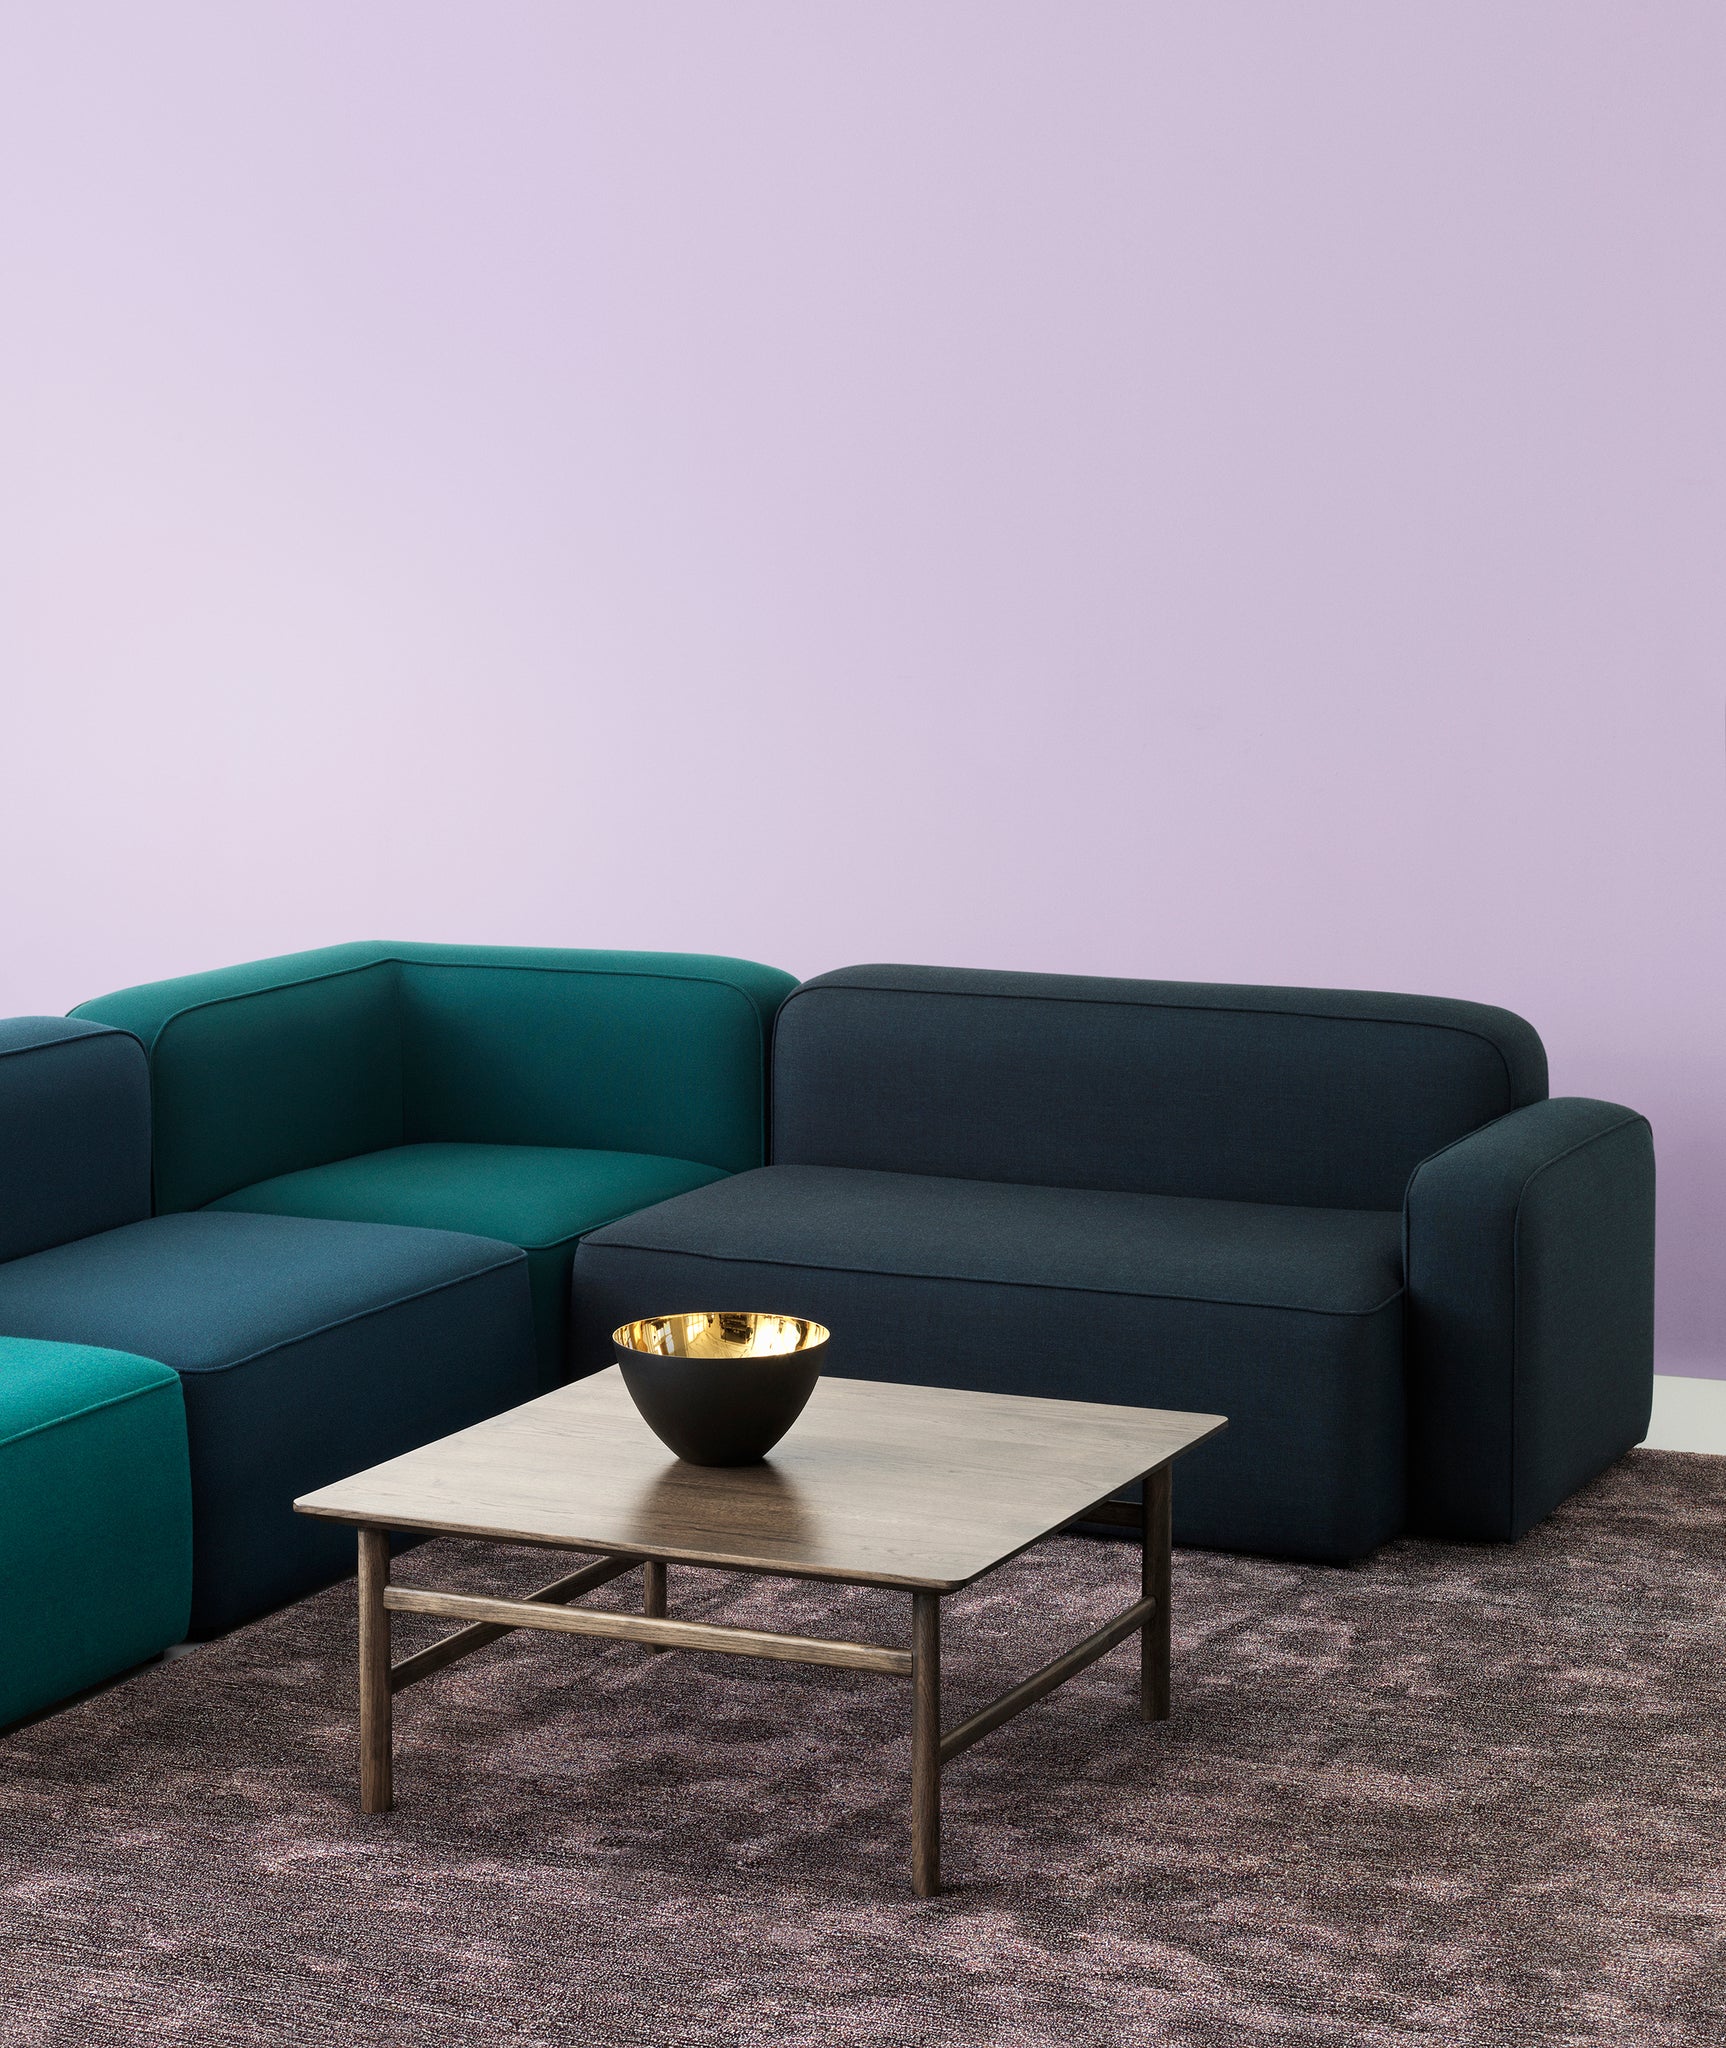 Rope Modular 4-PC Corner Sectional - More Options